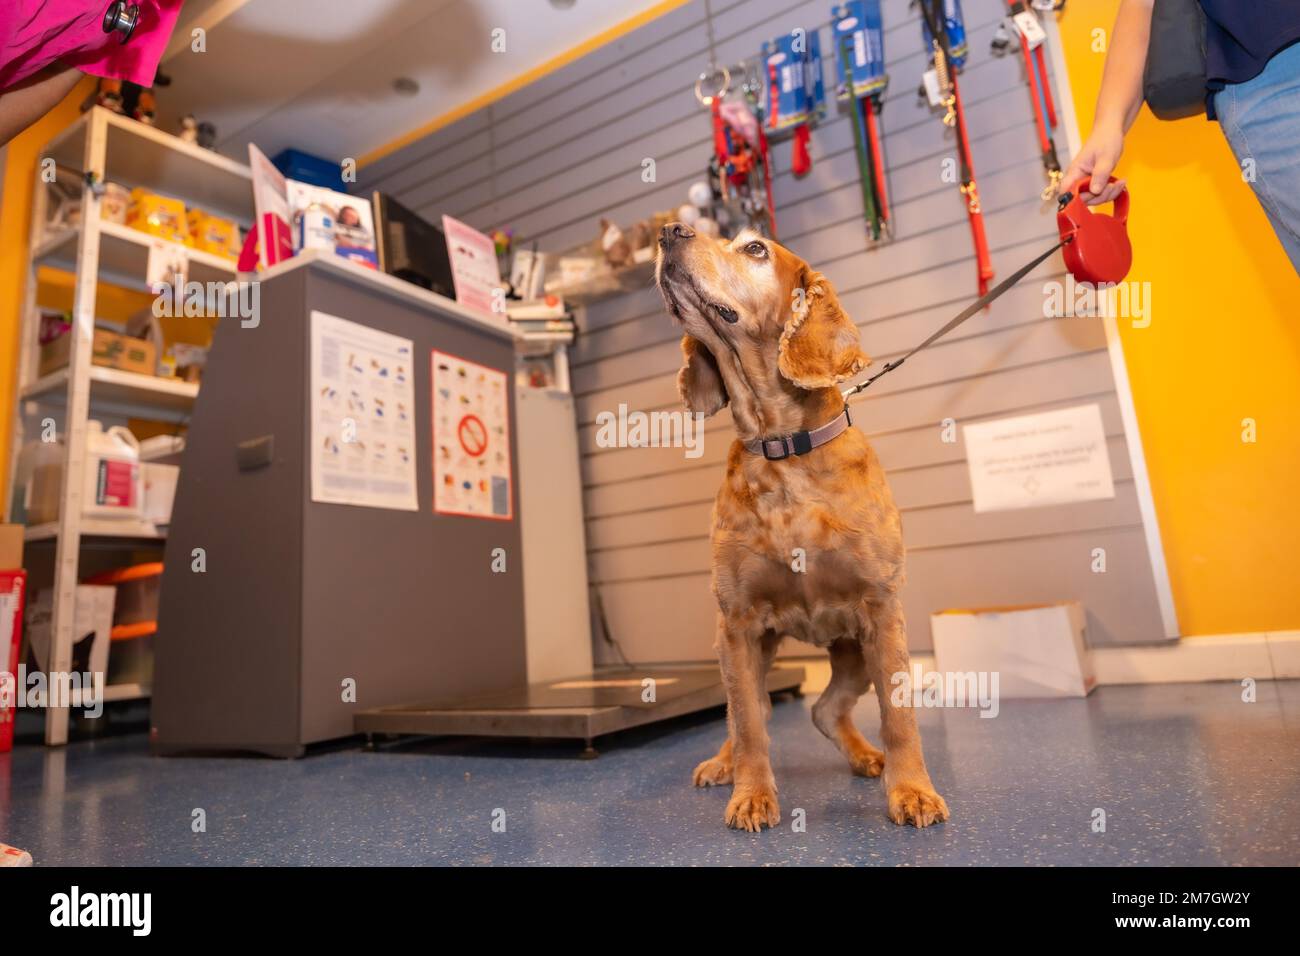 Veterinary clinic, a dog waiting to be treated at the entrance on the leash Stock Photo